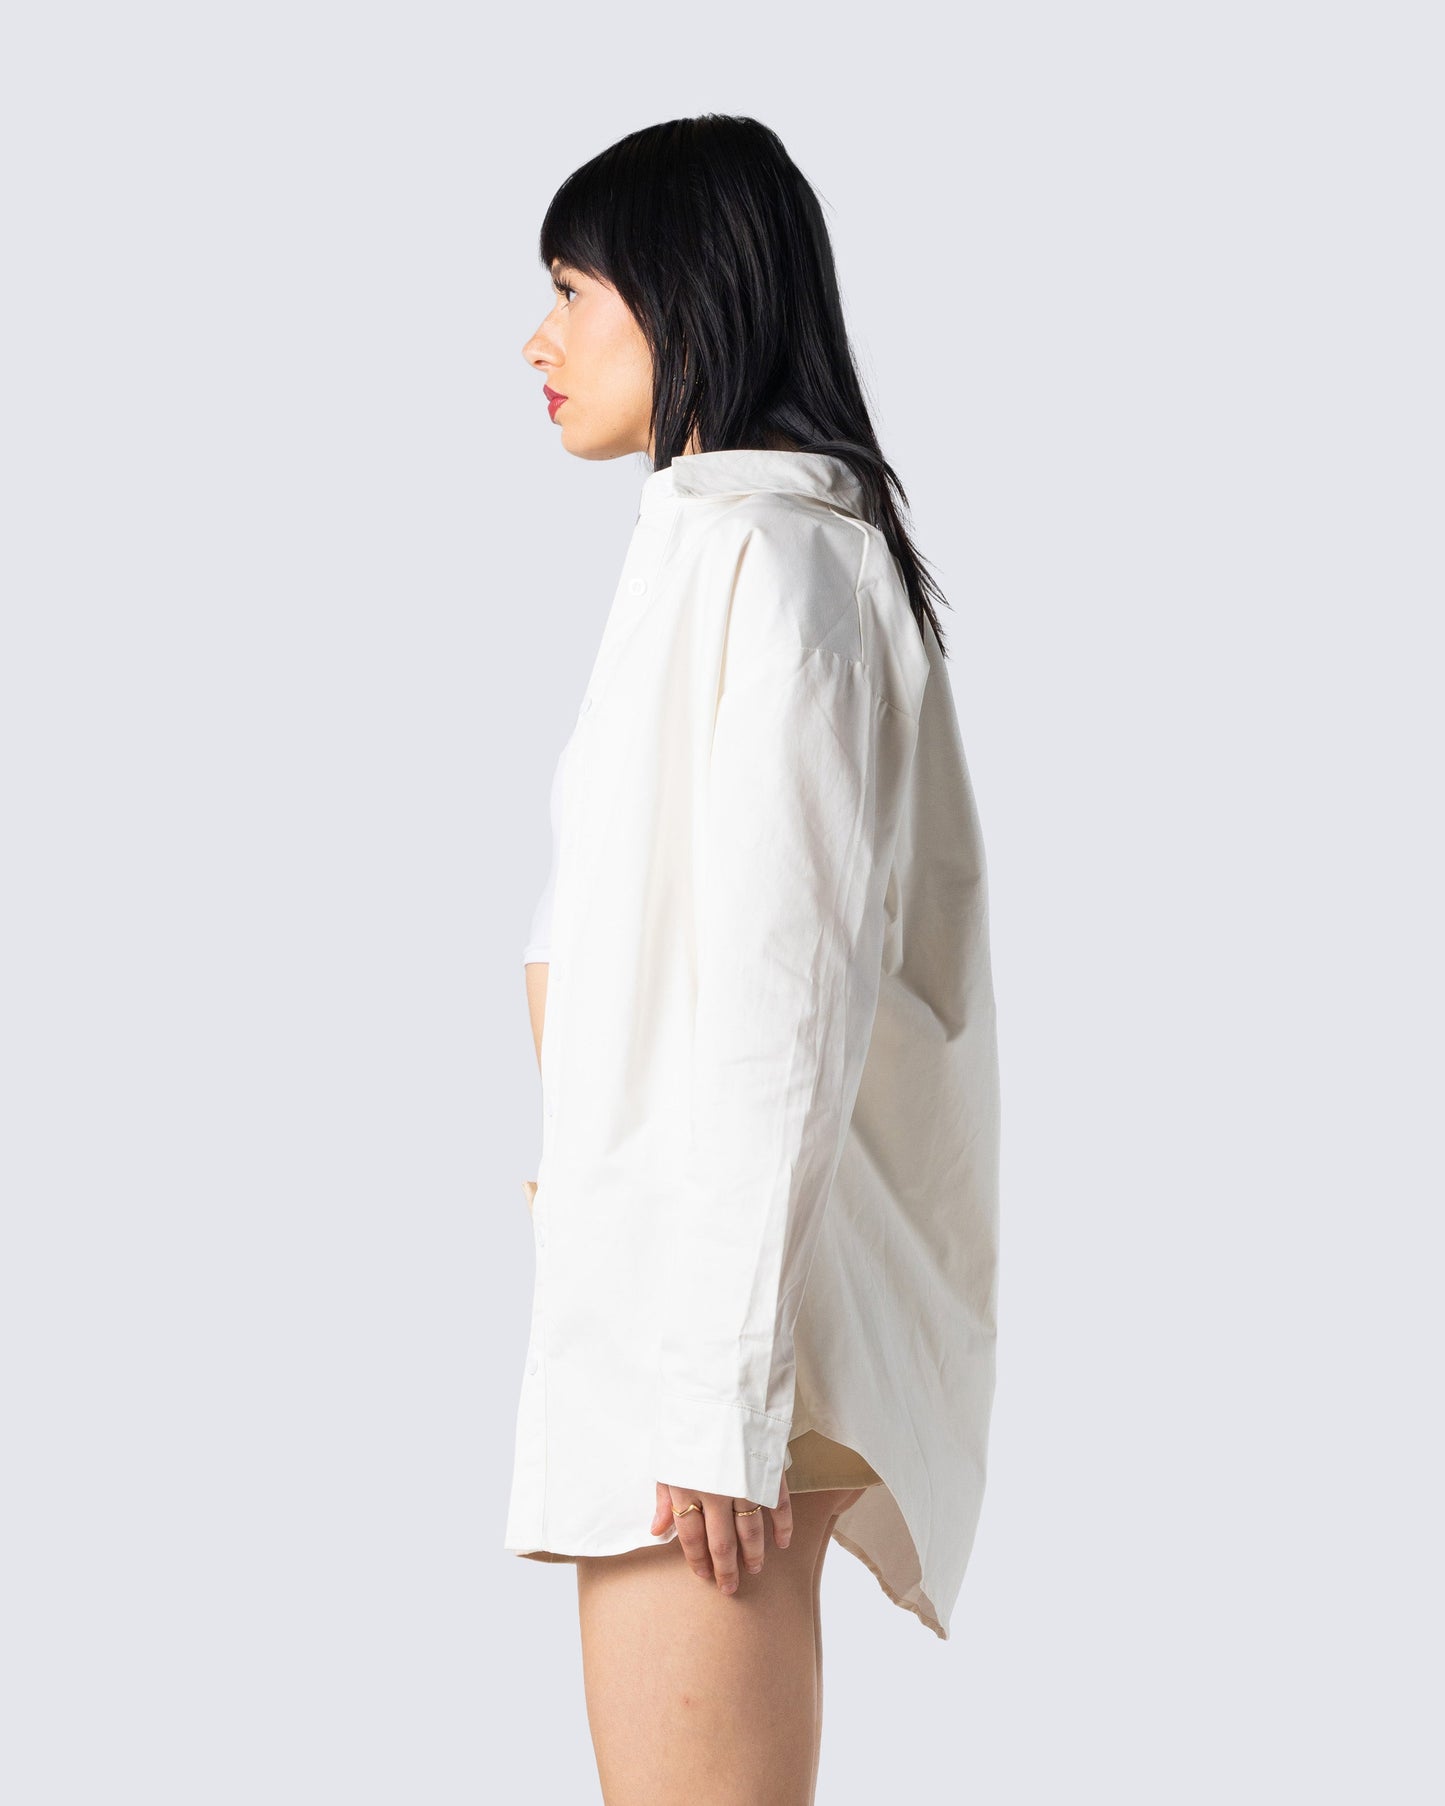 Claire White Oversized Shirt